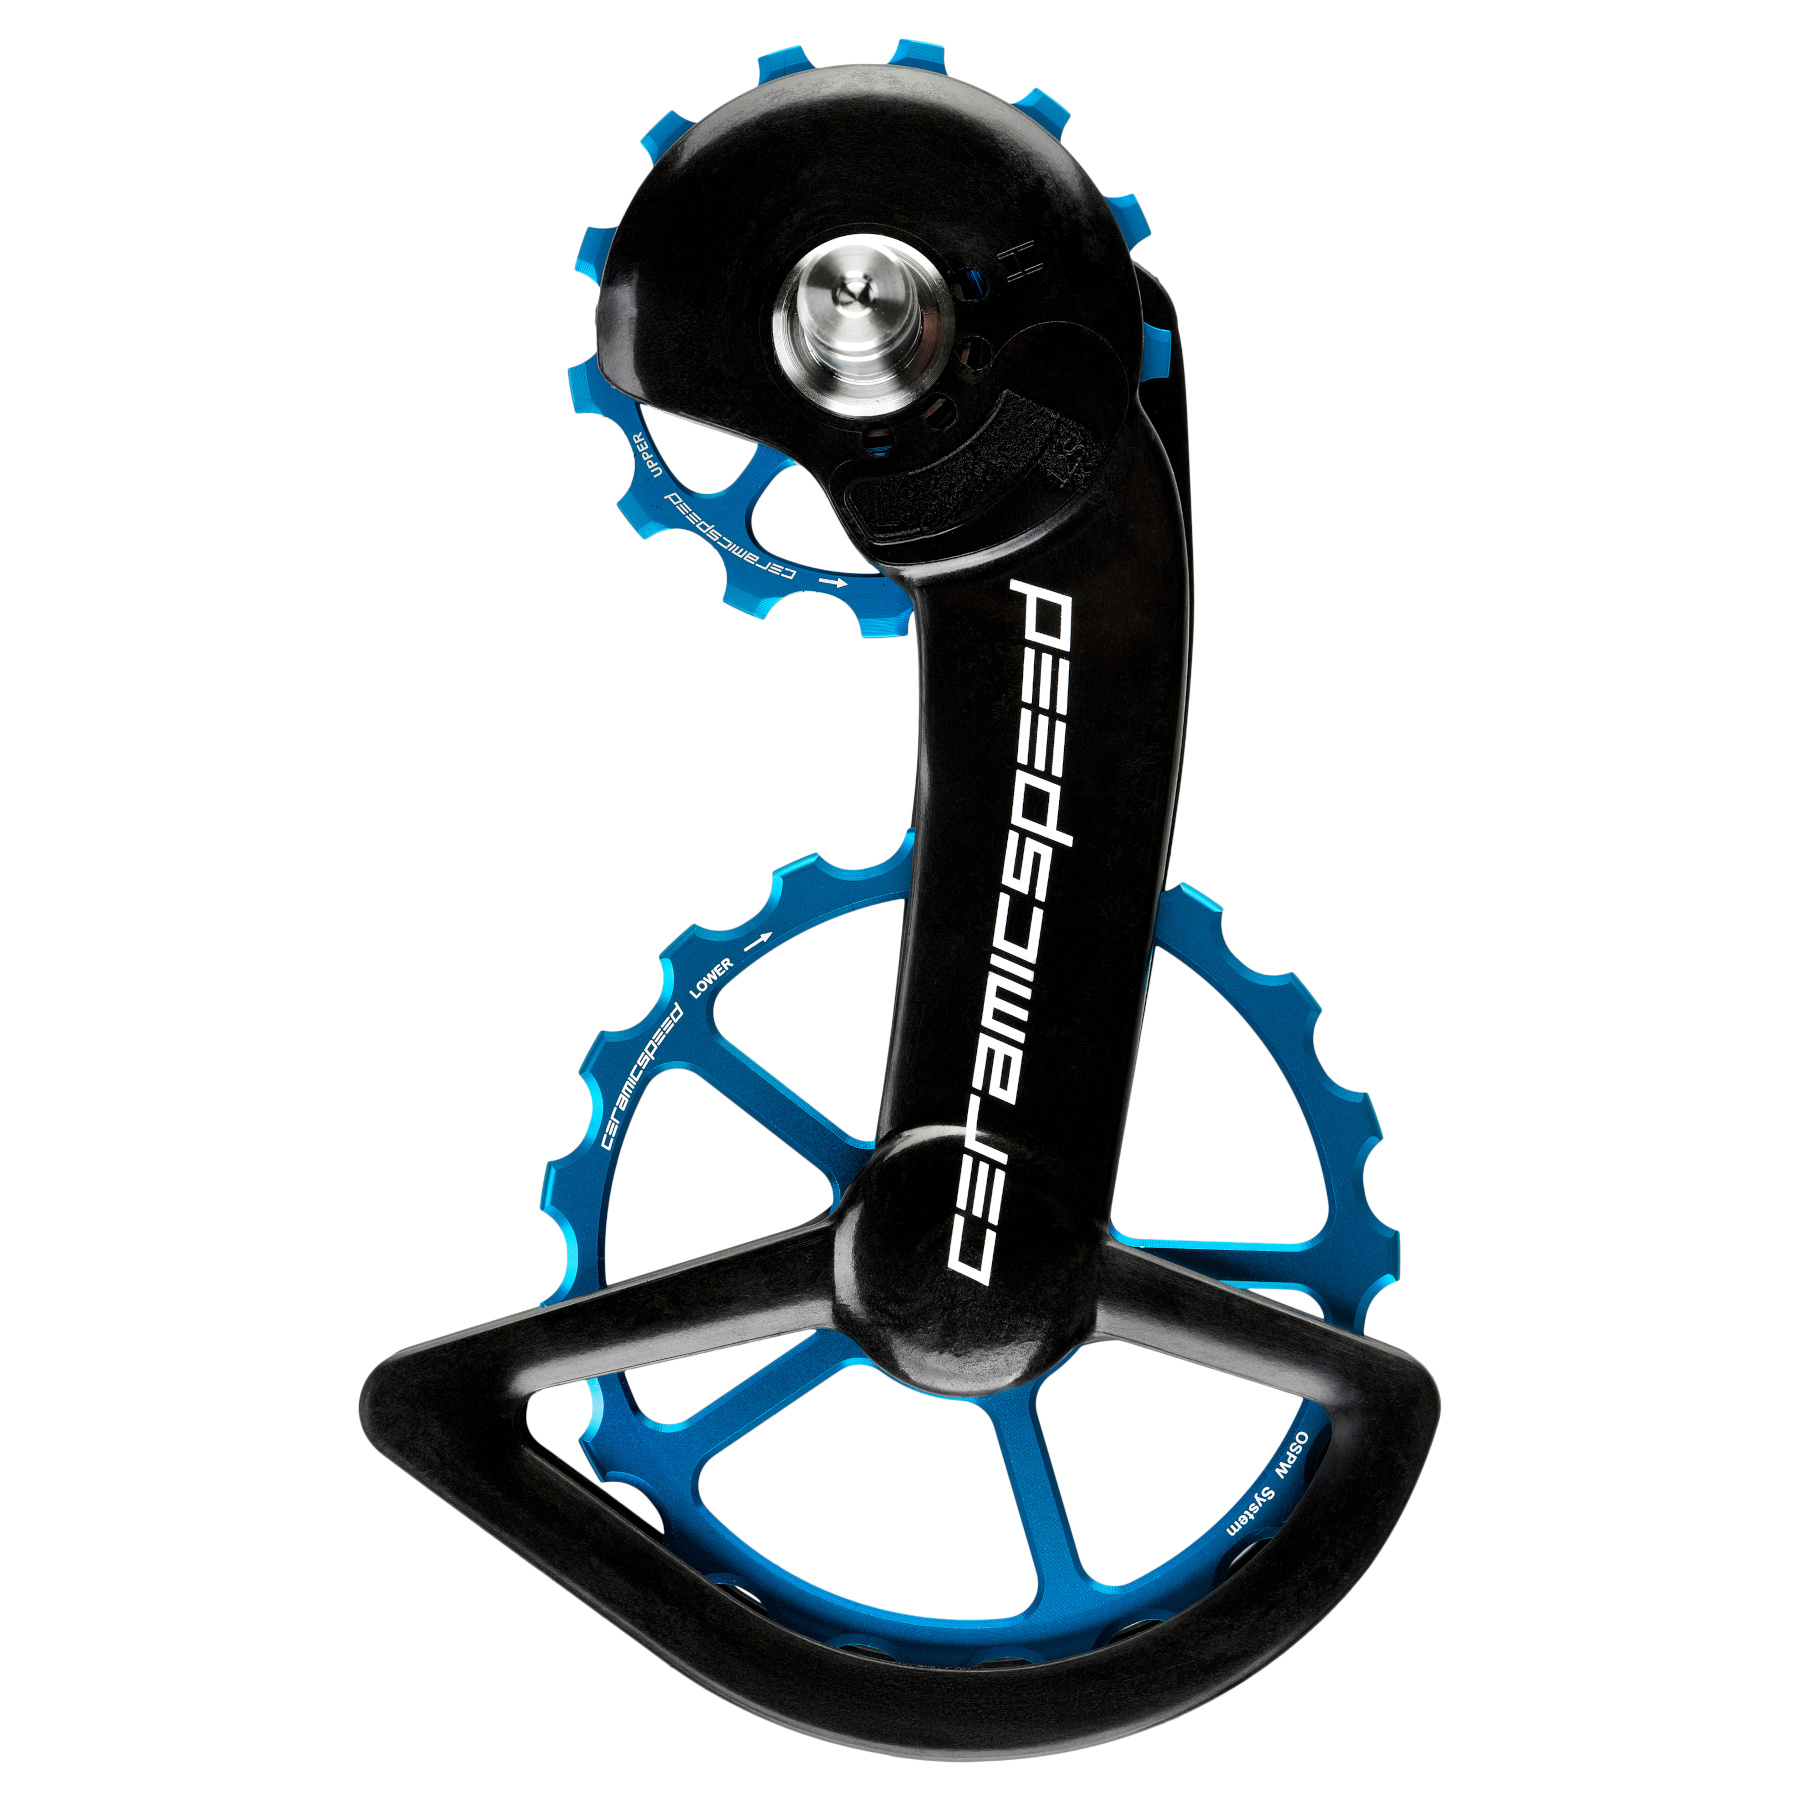 Image of CeramicSpeed OSPW Derailleur Pulley System - for Shimano R9200/R8100 (12s) | 13/19 Teeth - blue